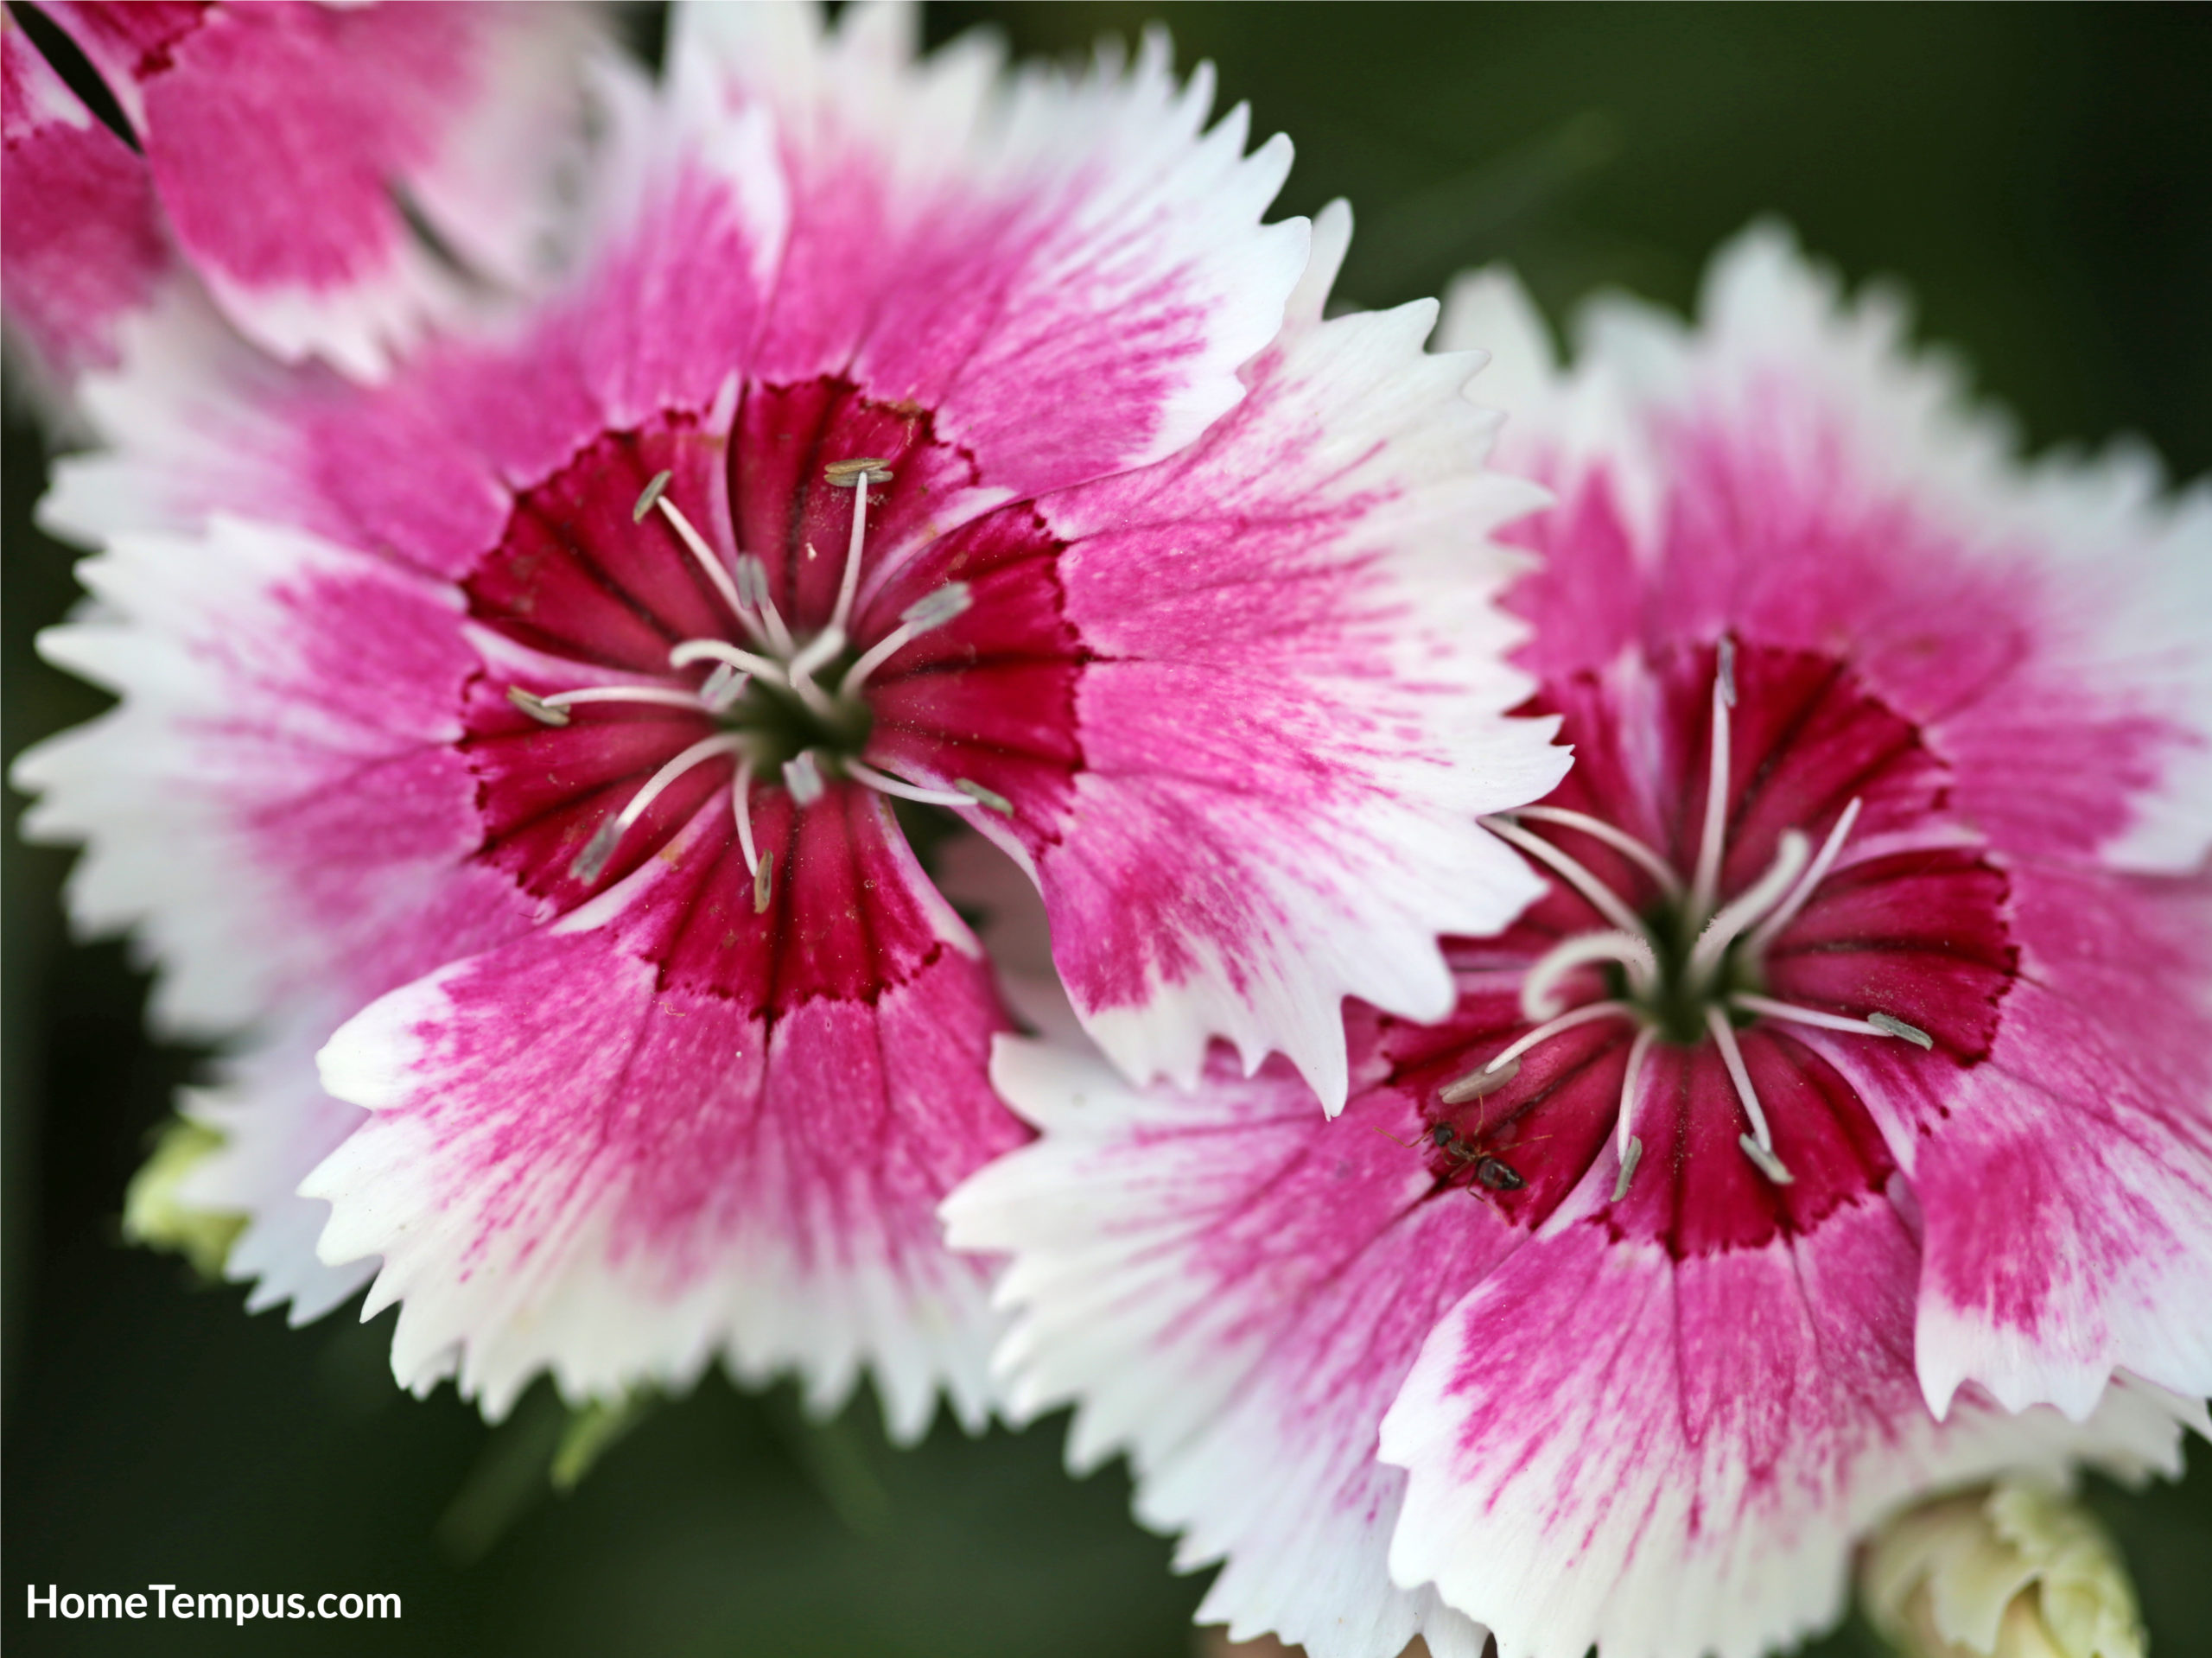 Pink dianthus - flowers that start with P